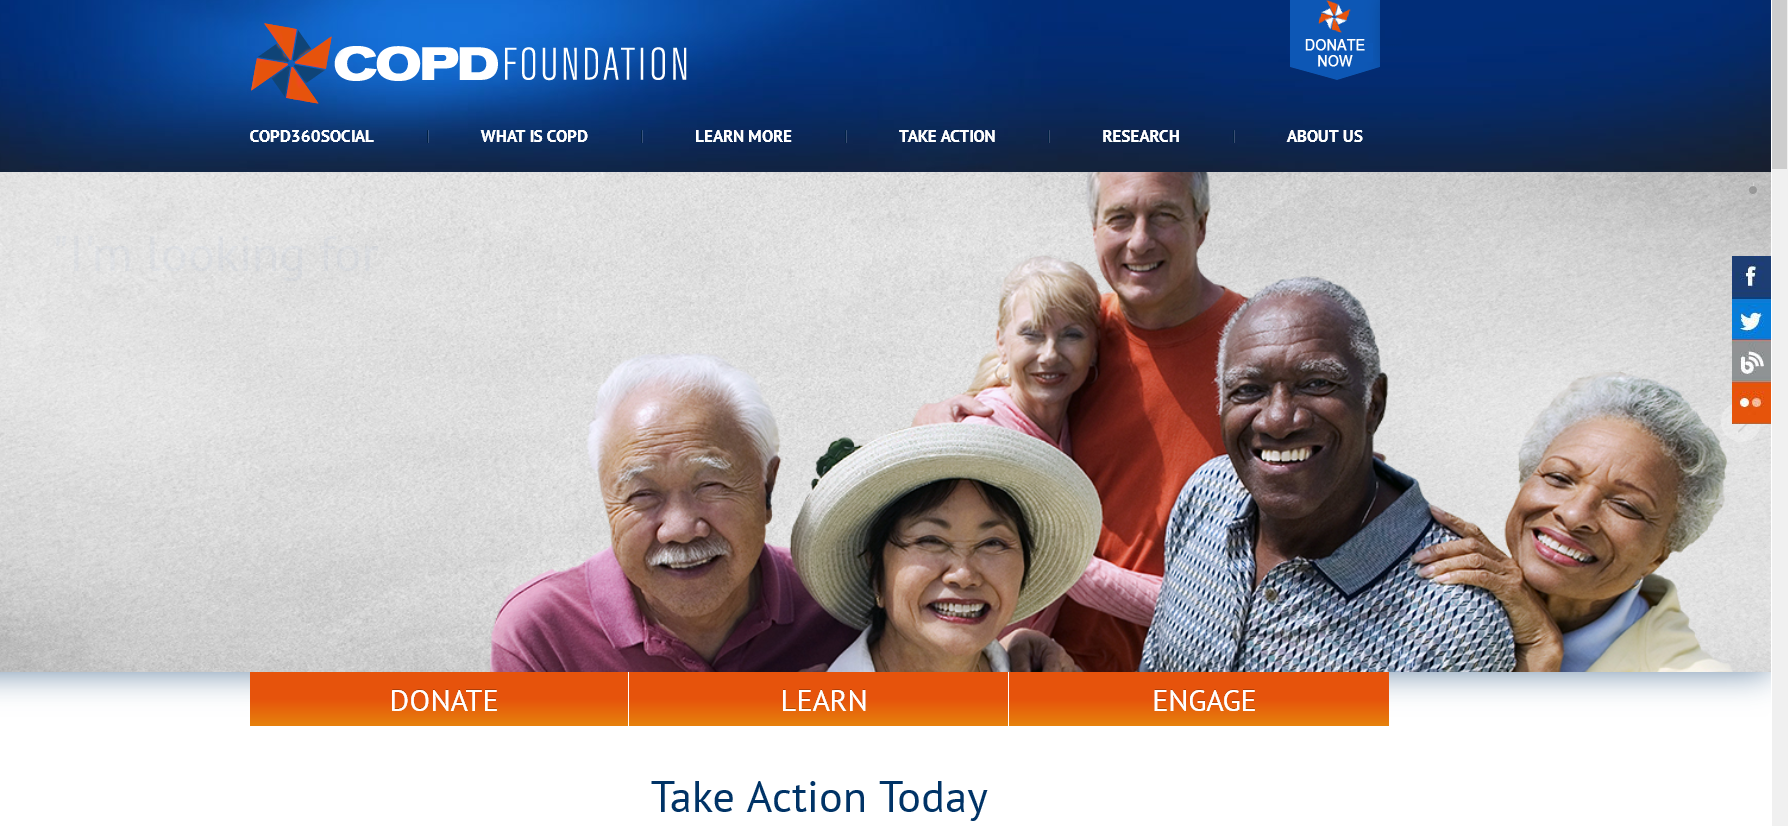 Home page of the COPD Foundation website.